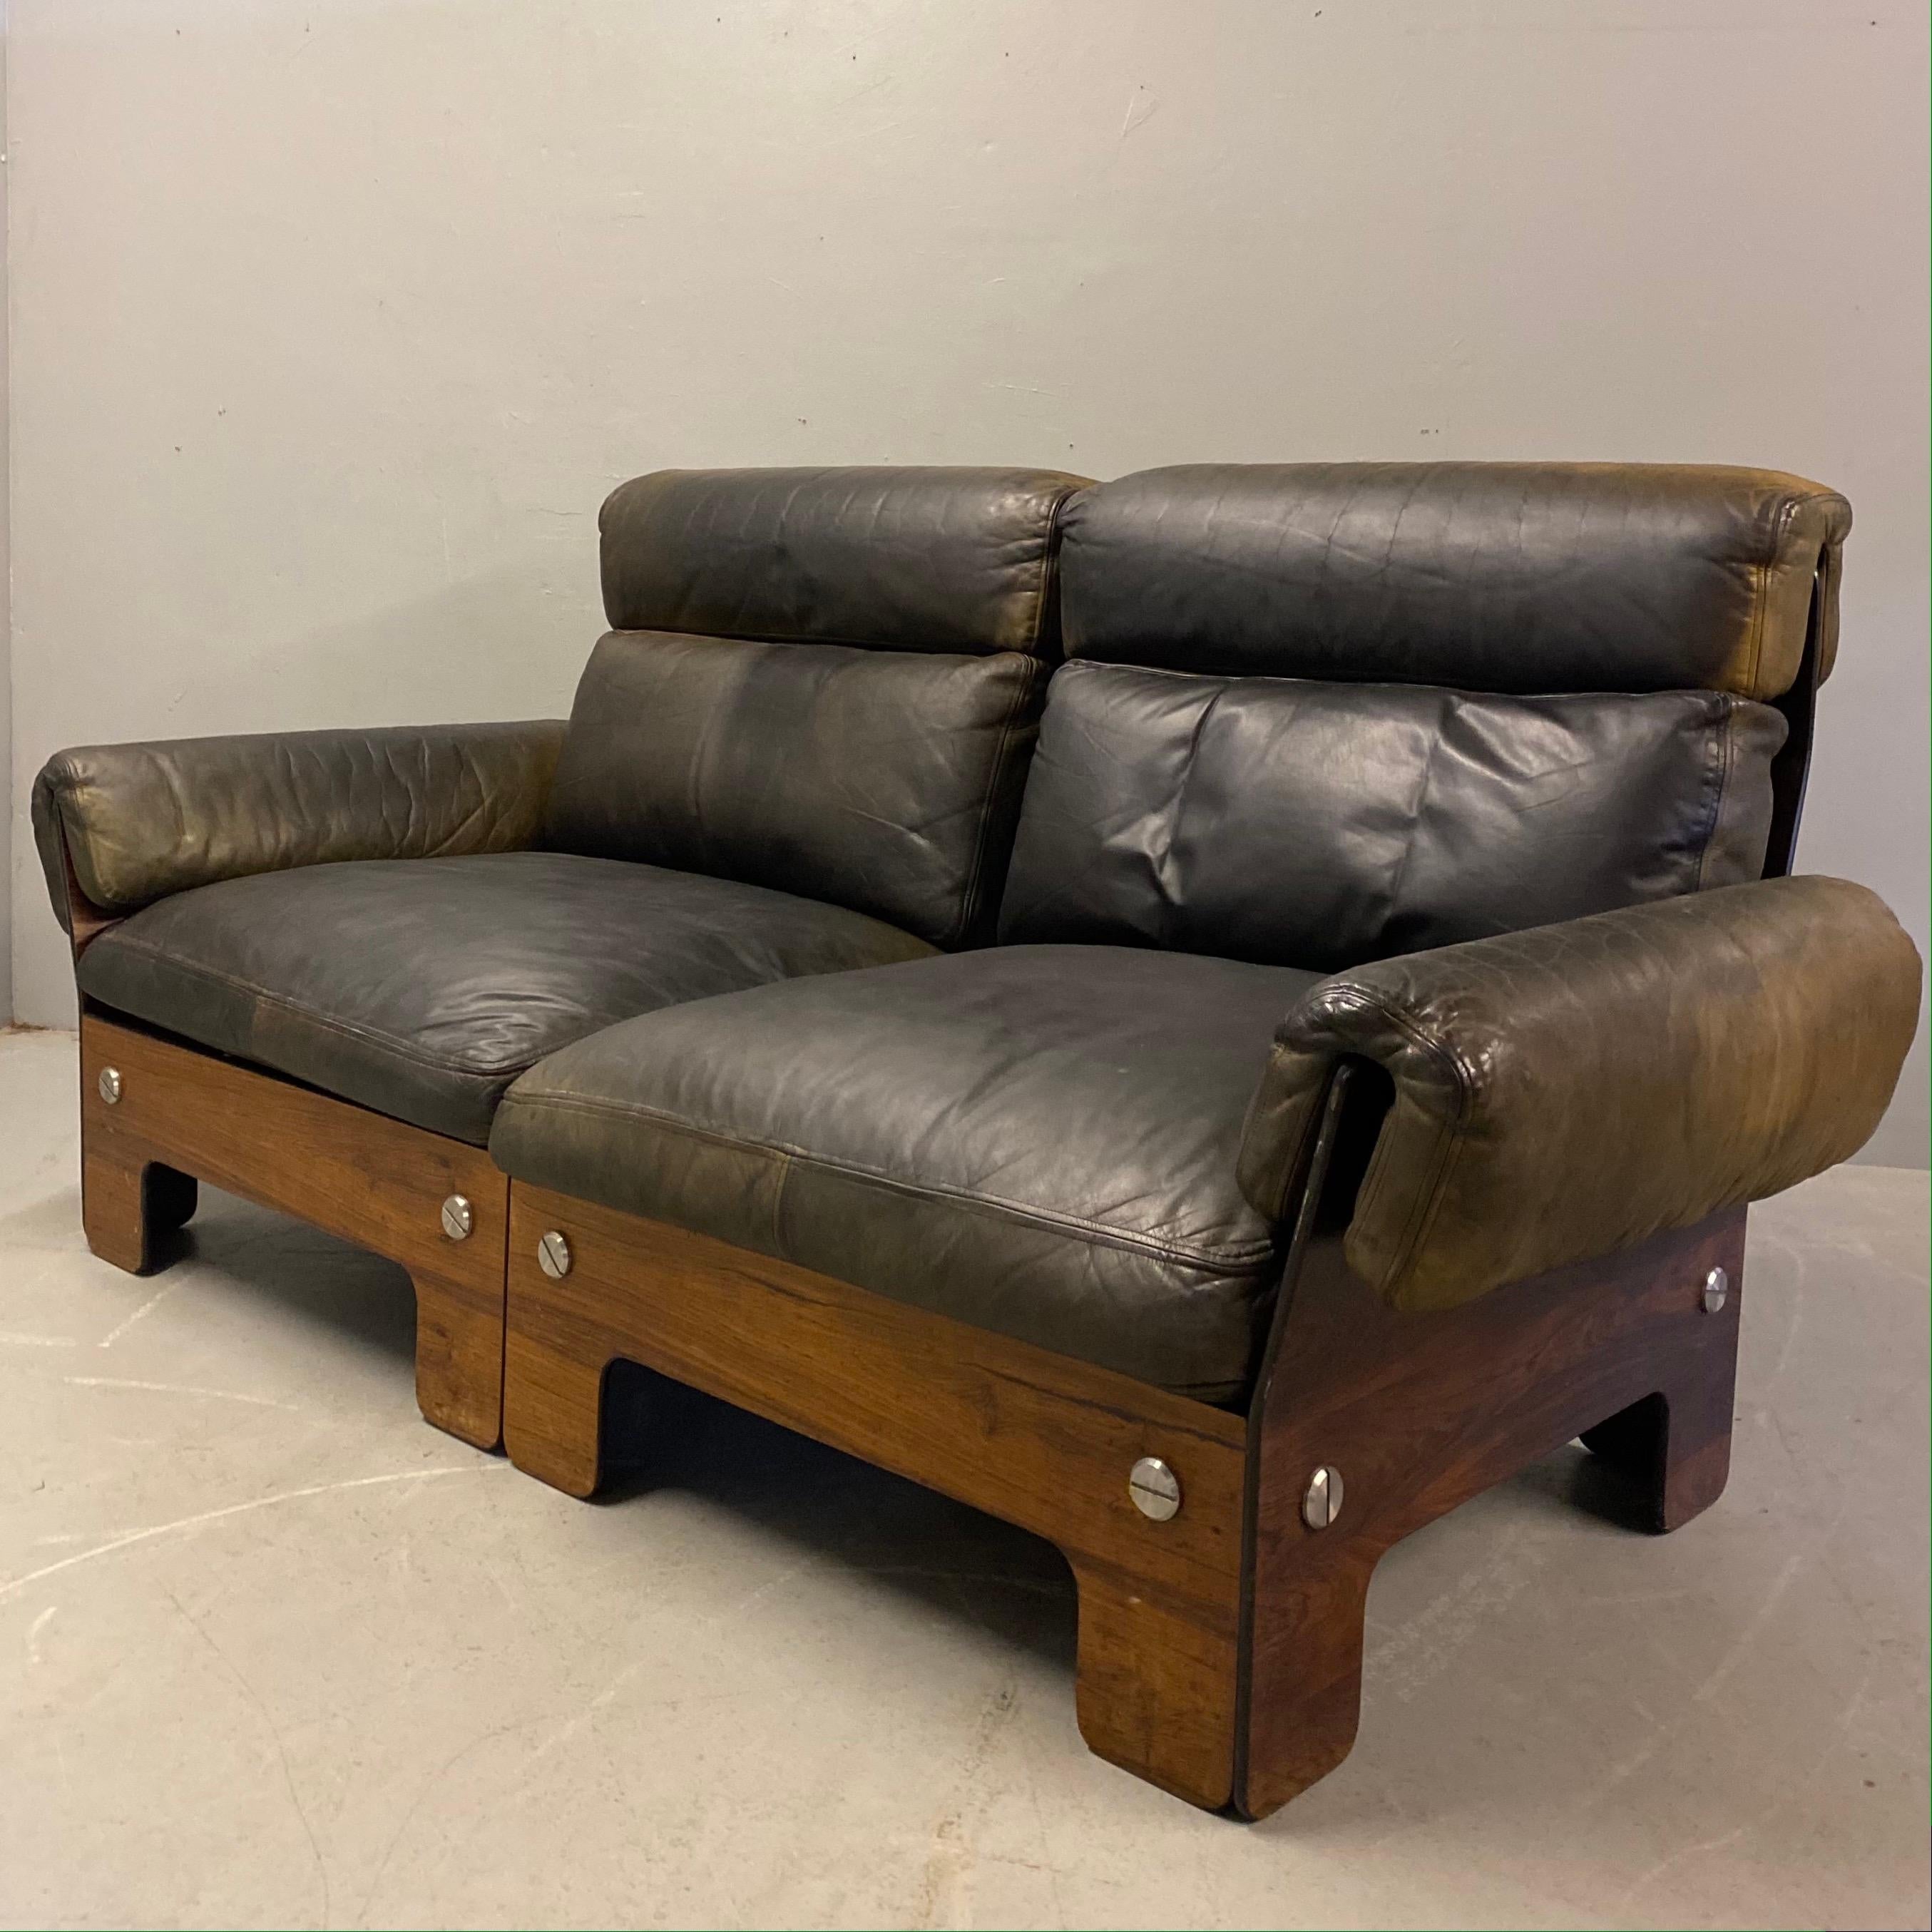 A stunning midcentury Norwegian rosewood & leather two seater sofa designed by Siguard Ressell for Vatne Mobley. This beautiful leather sofa has chrome fixings & pirelli rubber seat supports. The leather arms are attached by large press studs. The